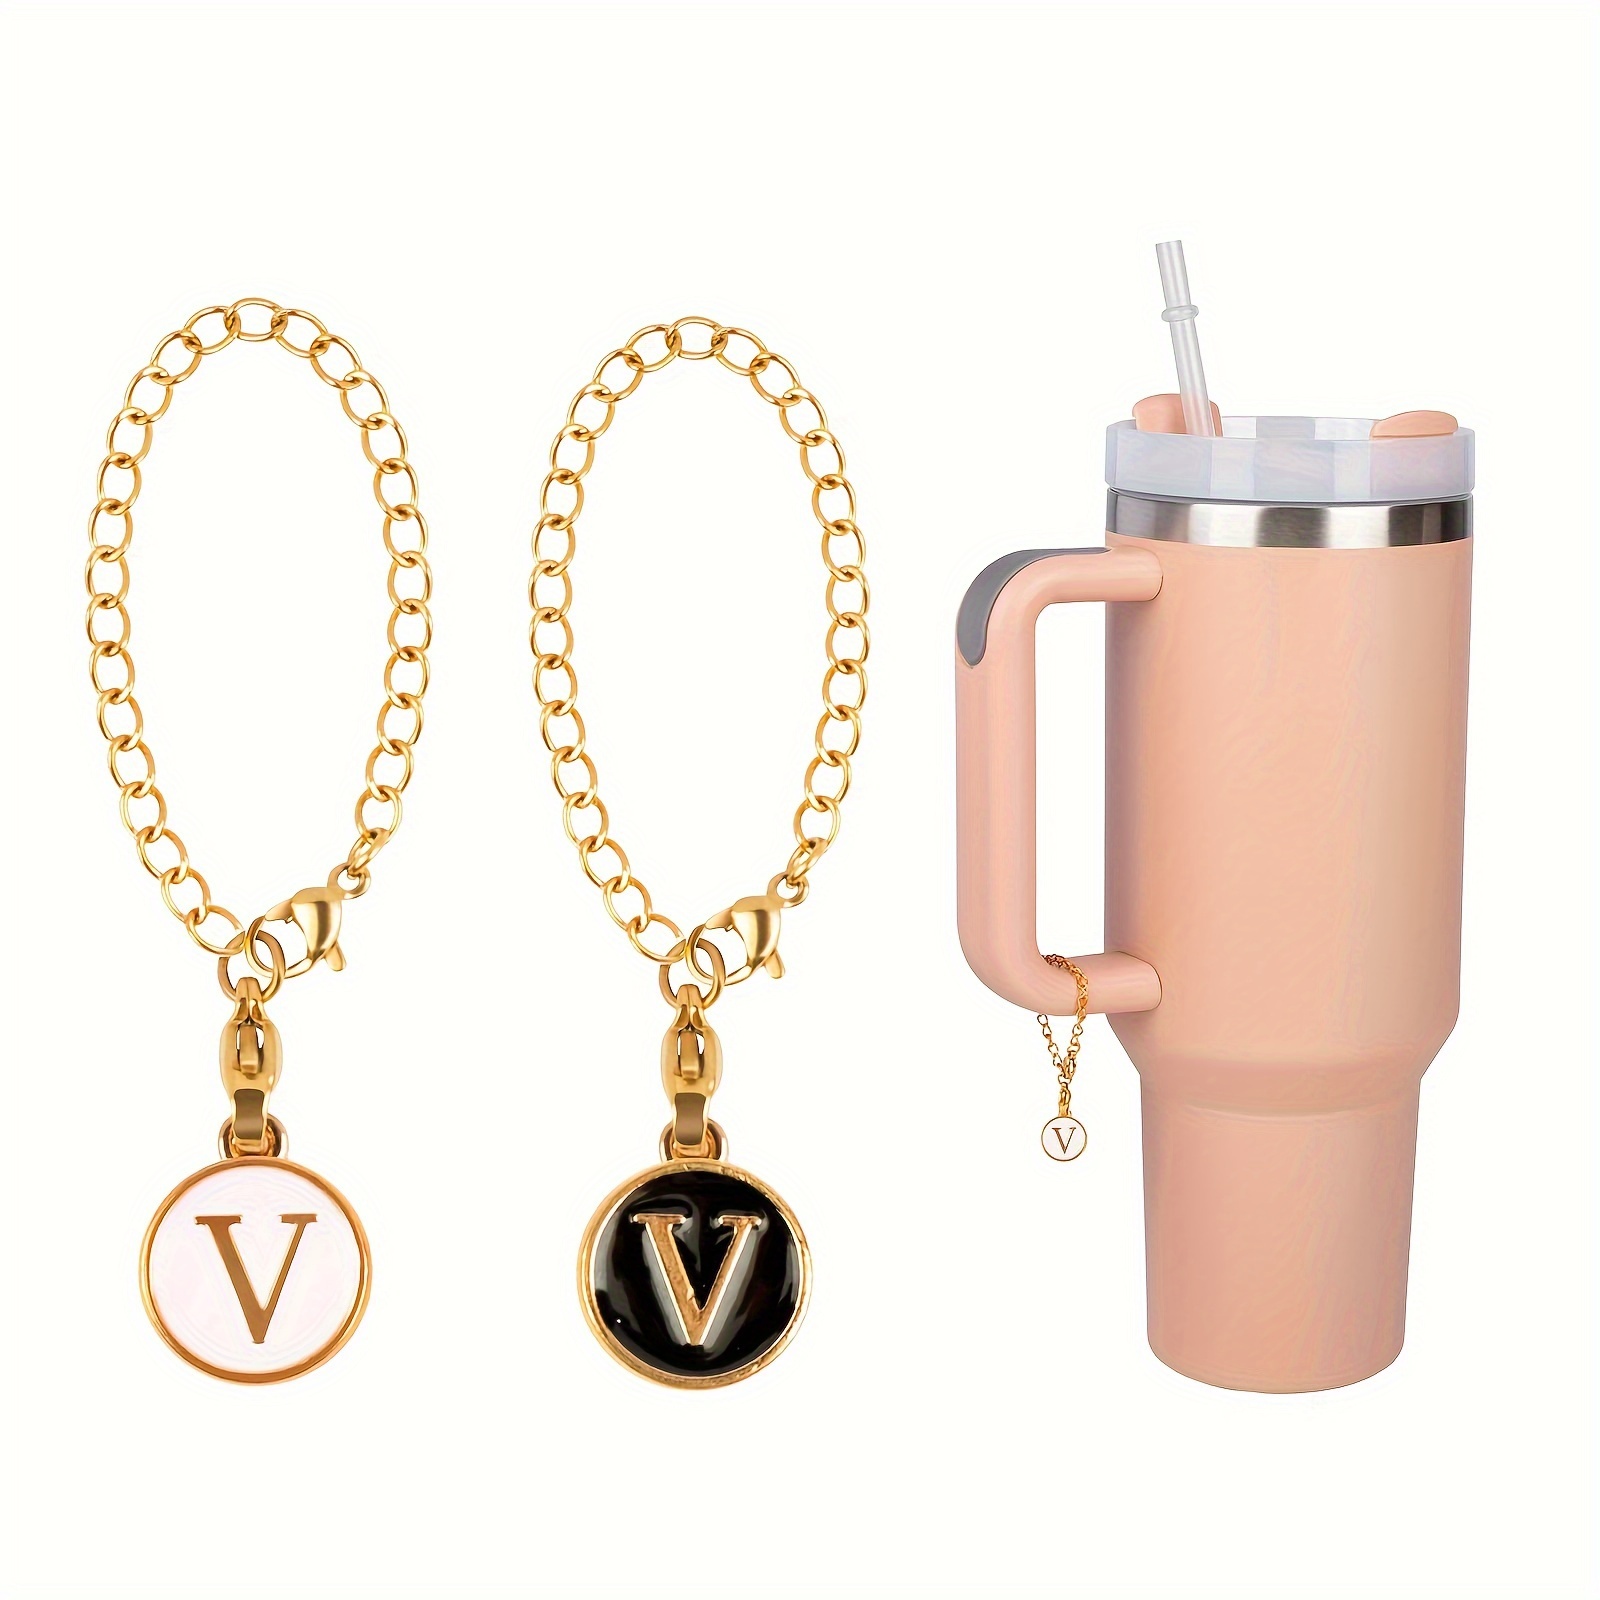 Luxurious Letter Charm Accessories for Stanley Cup Initial Name ID  Personalized Handle Charm for Stanley Tumbler Cup Accessories